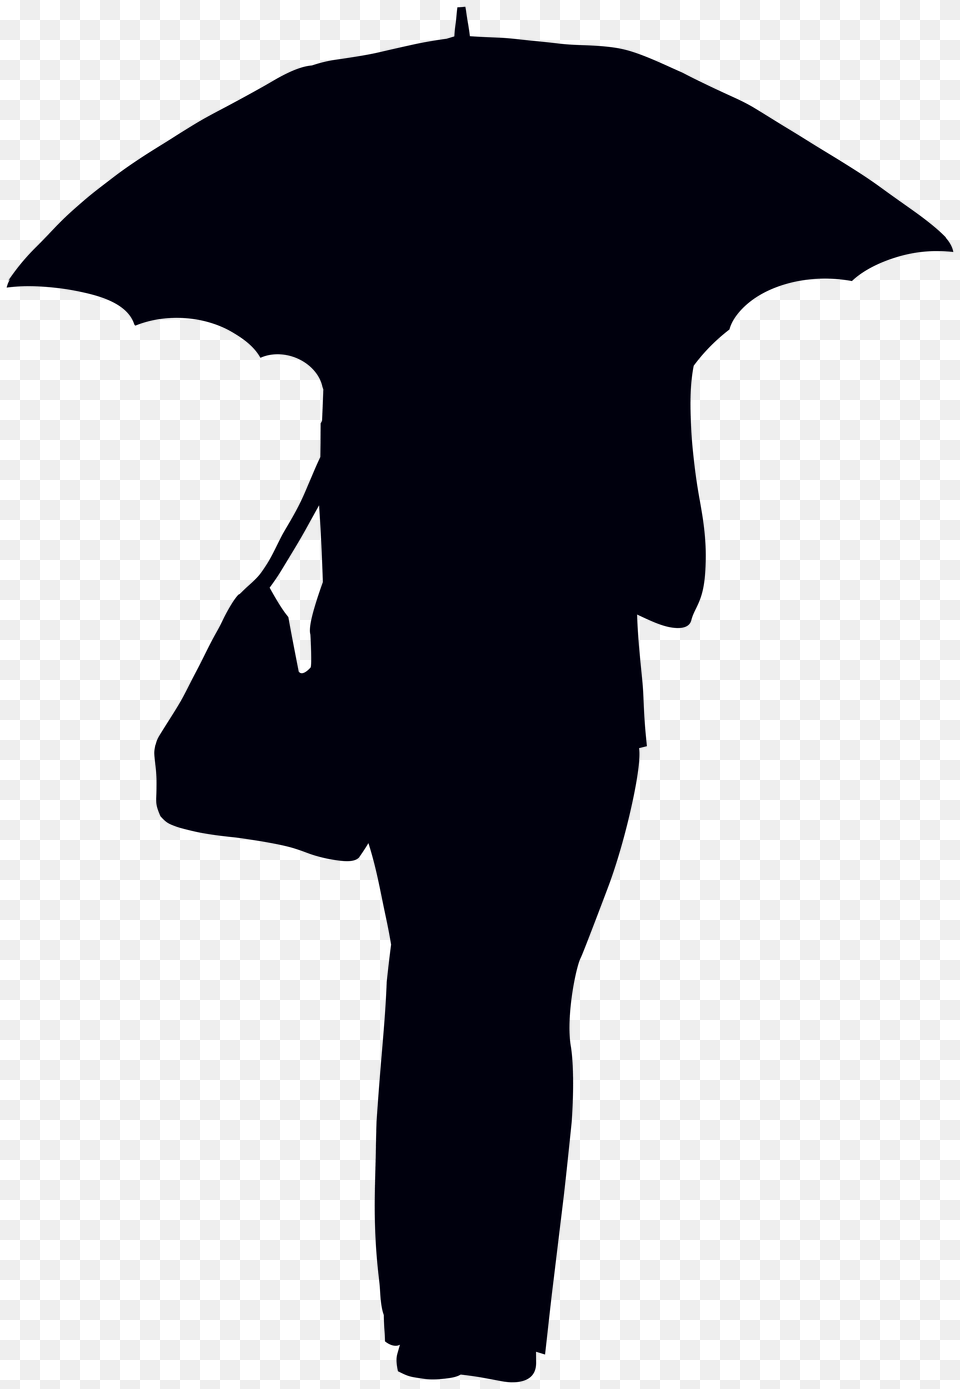 Woman With Umbrella Silhouette Clip Gallery, People, Person, Cross, Symbol Png